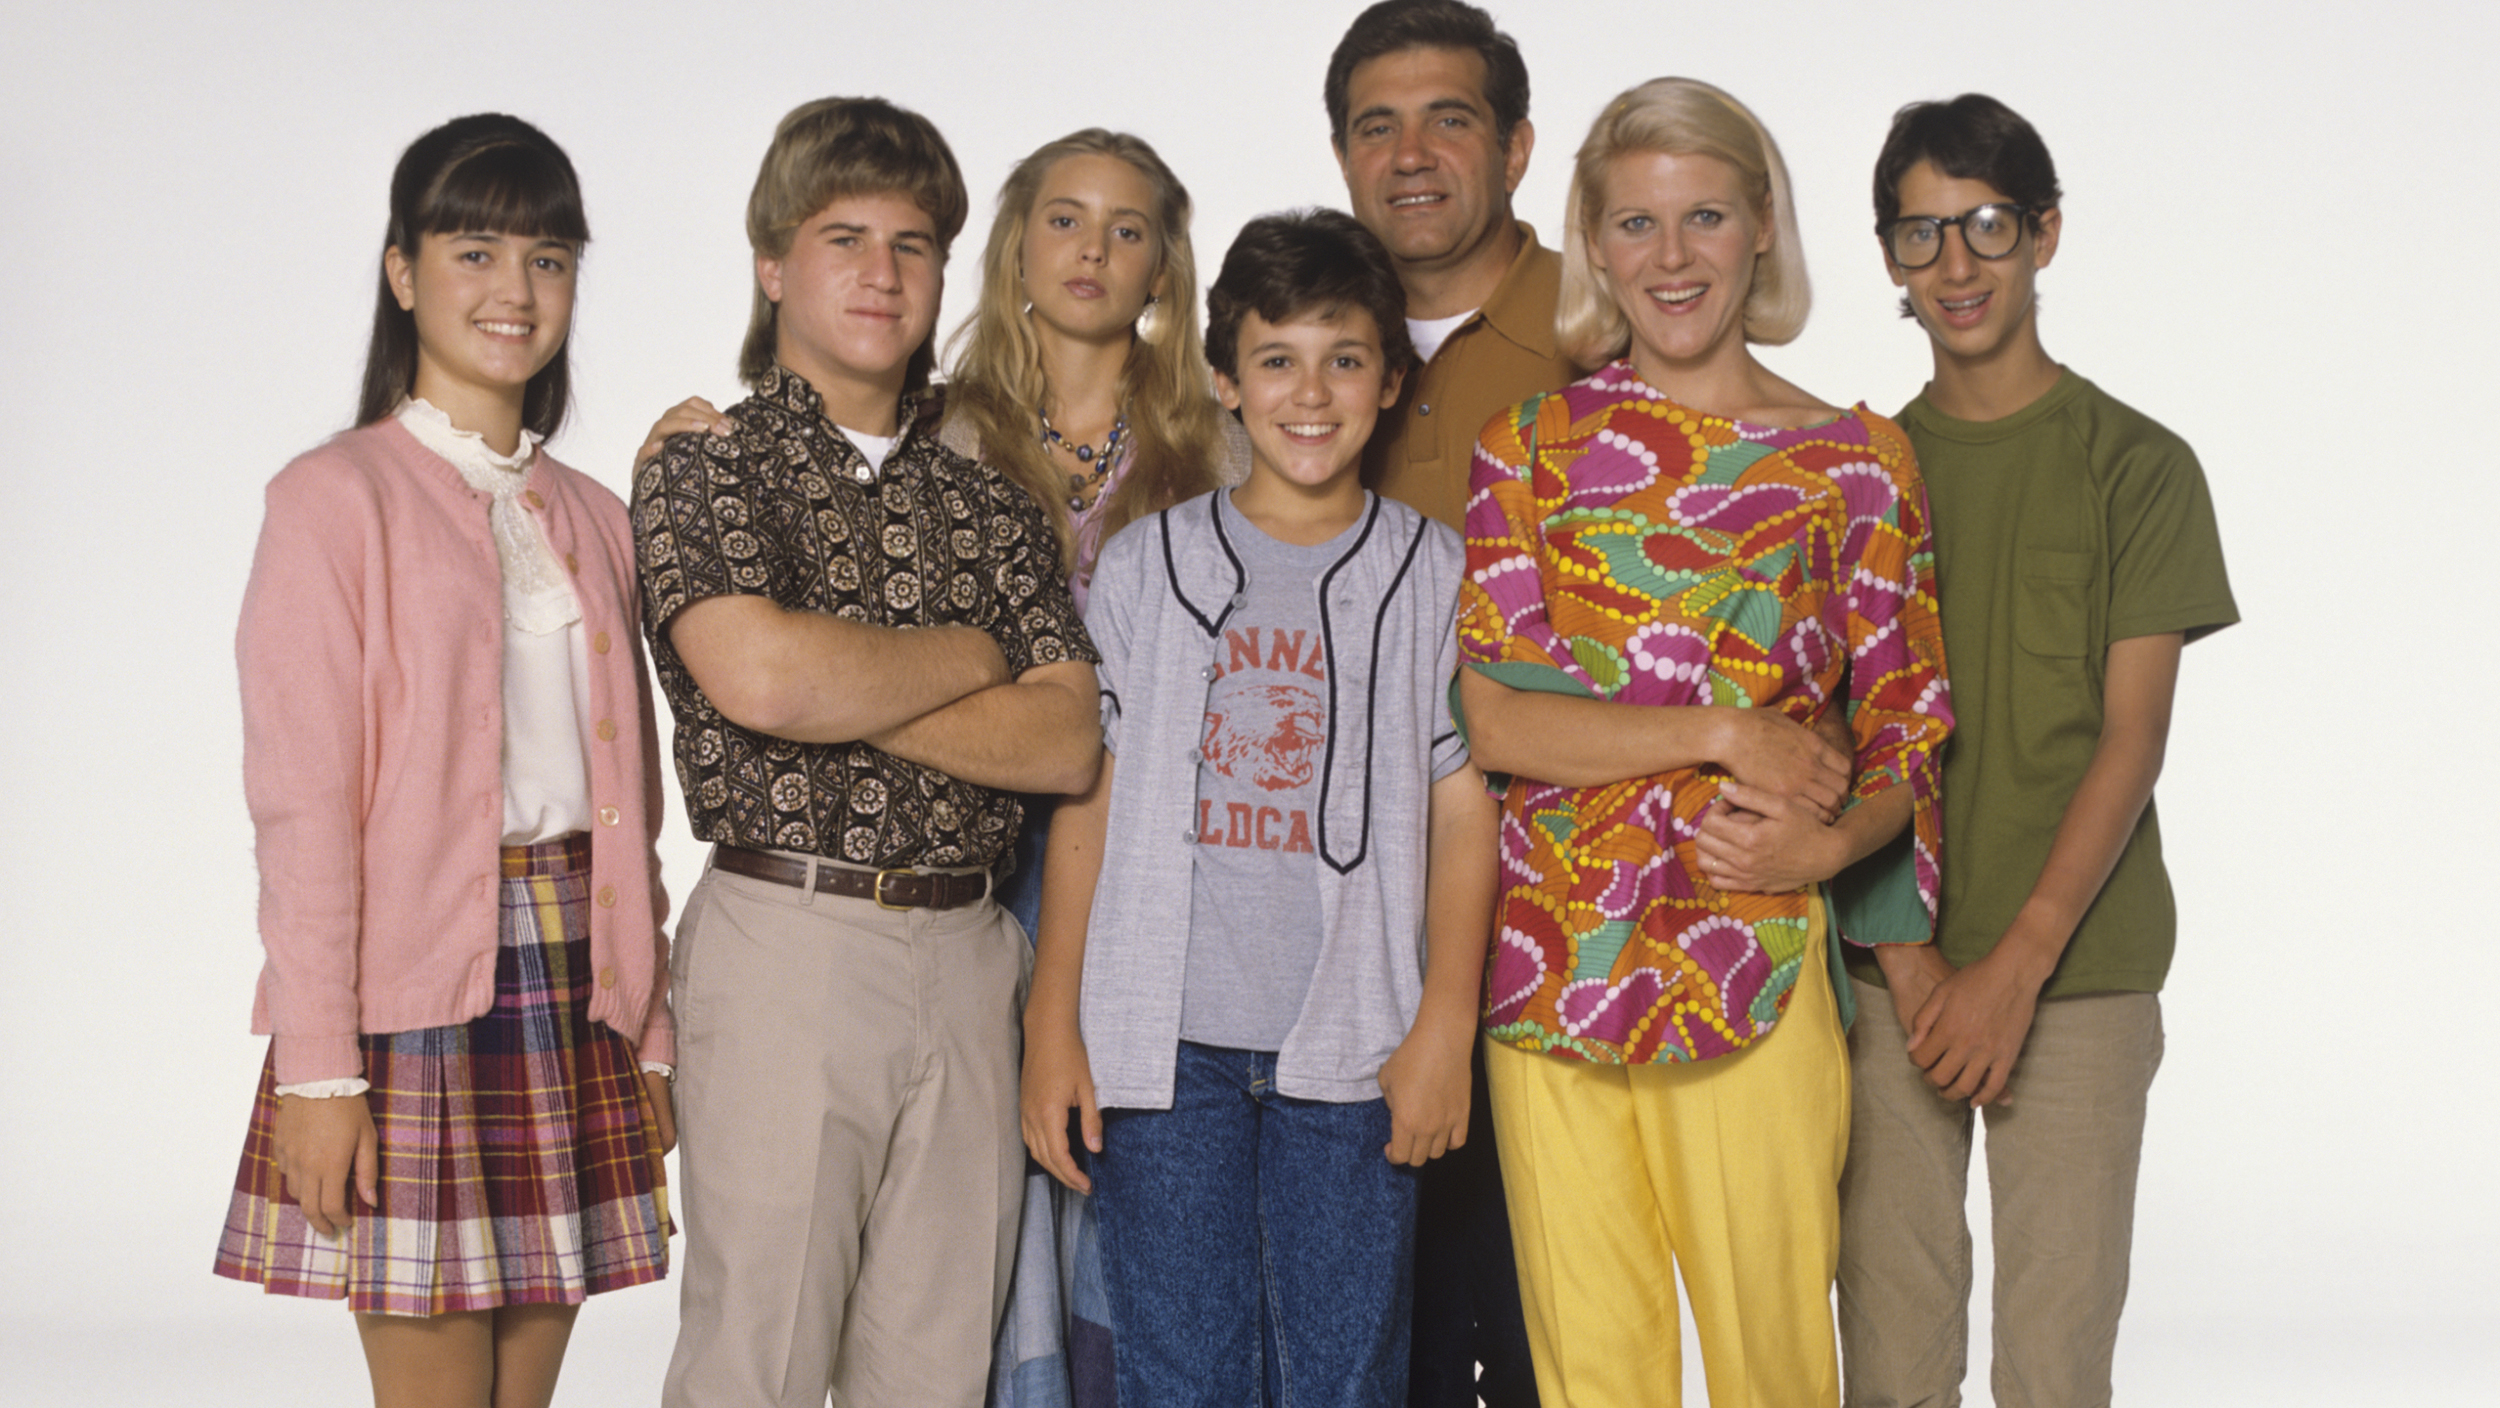 The Wonder Years' cast has photo-filled reunion